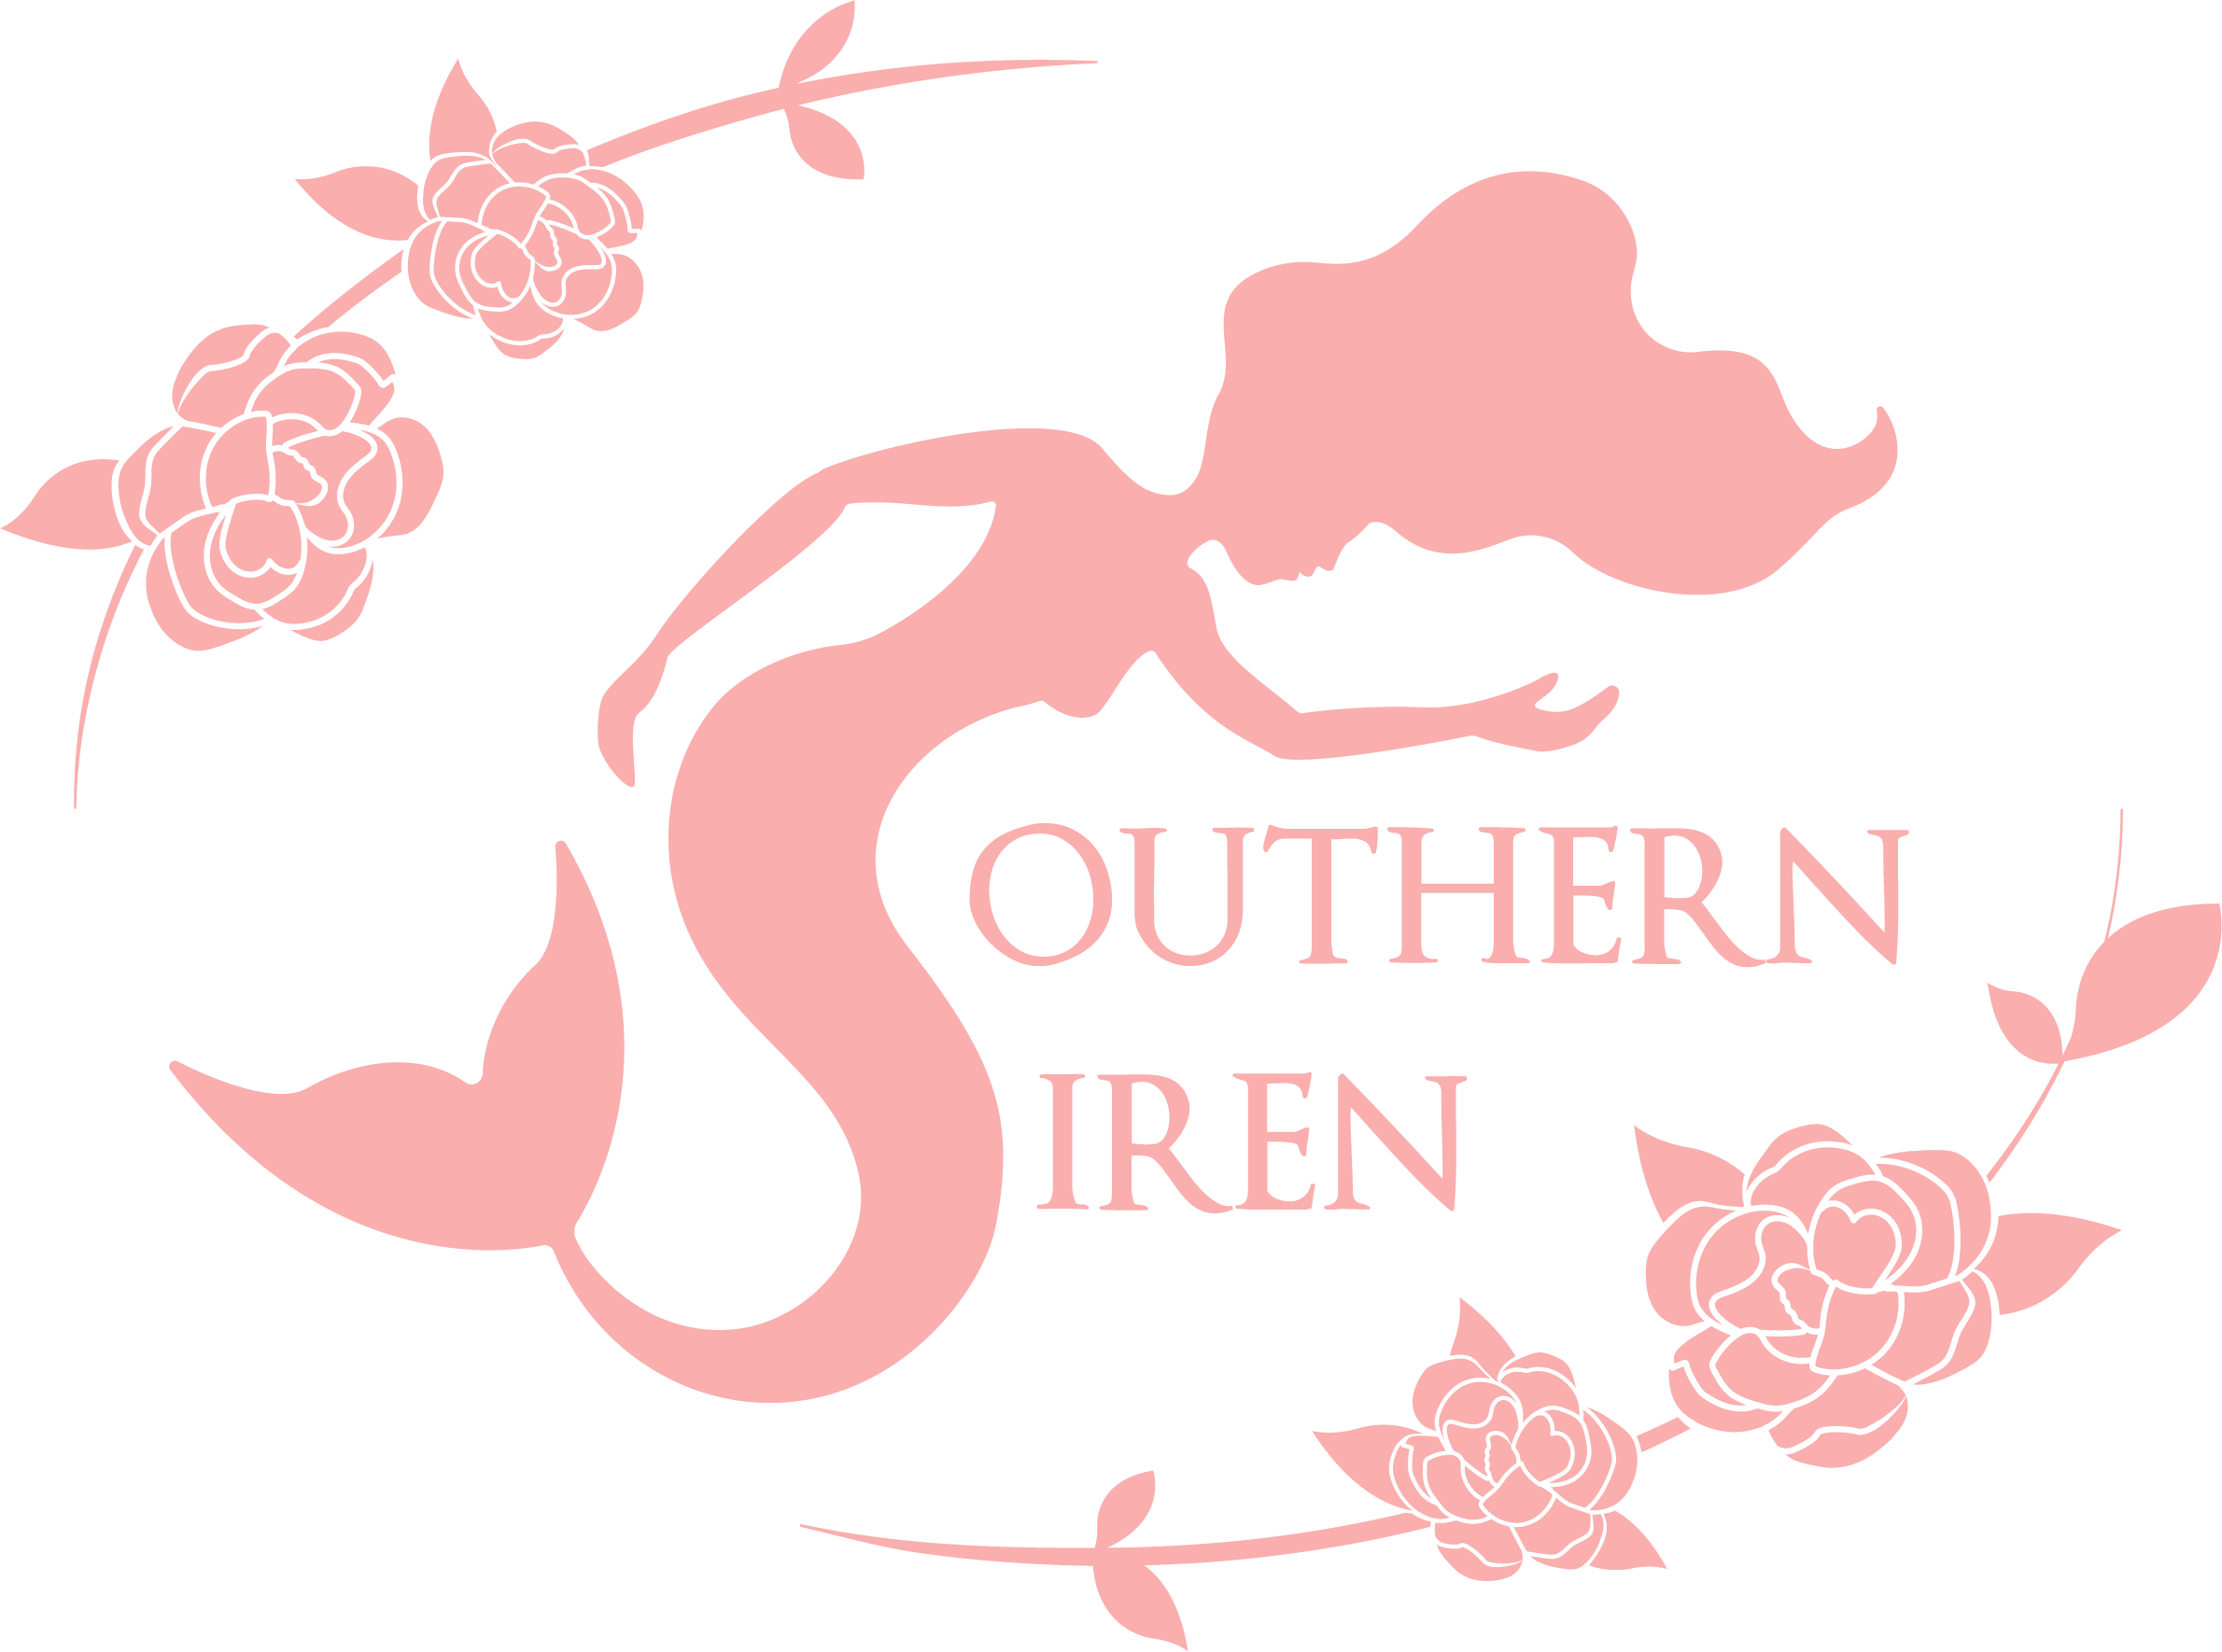 The Southern Siren